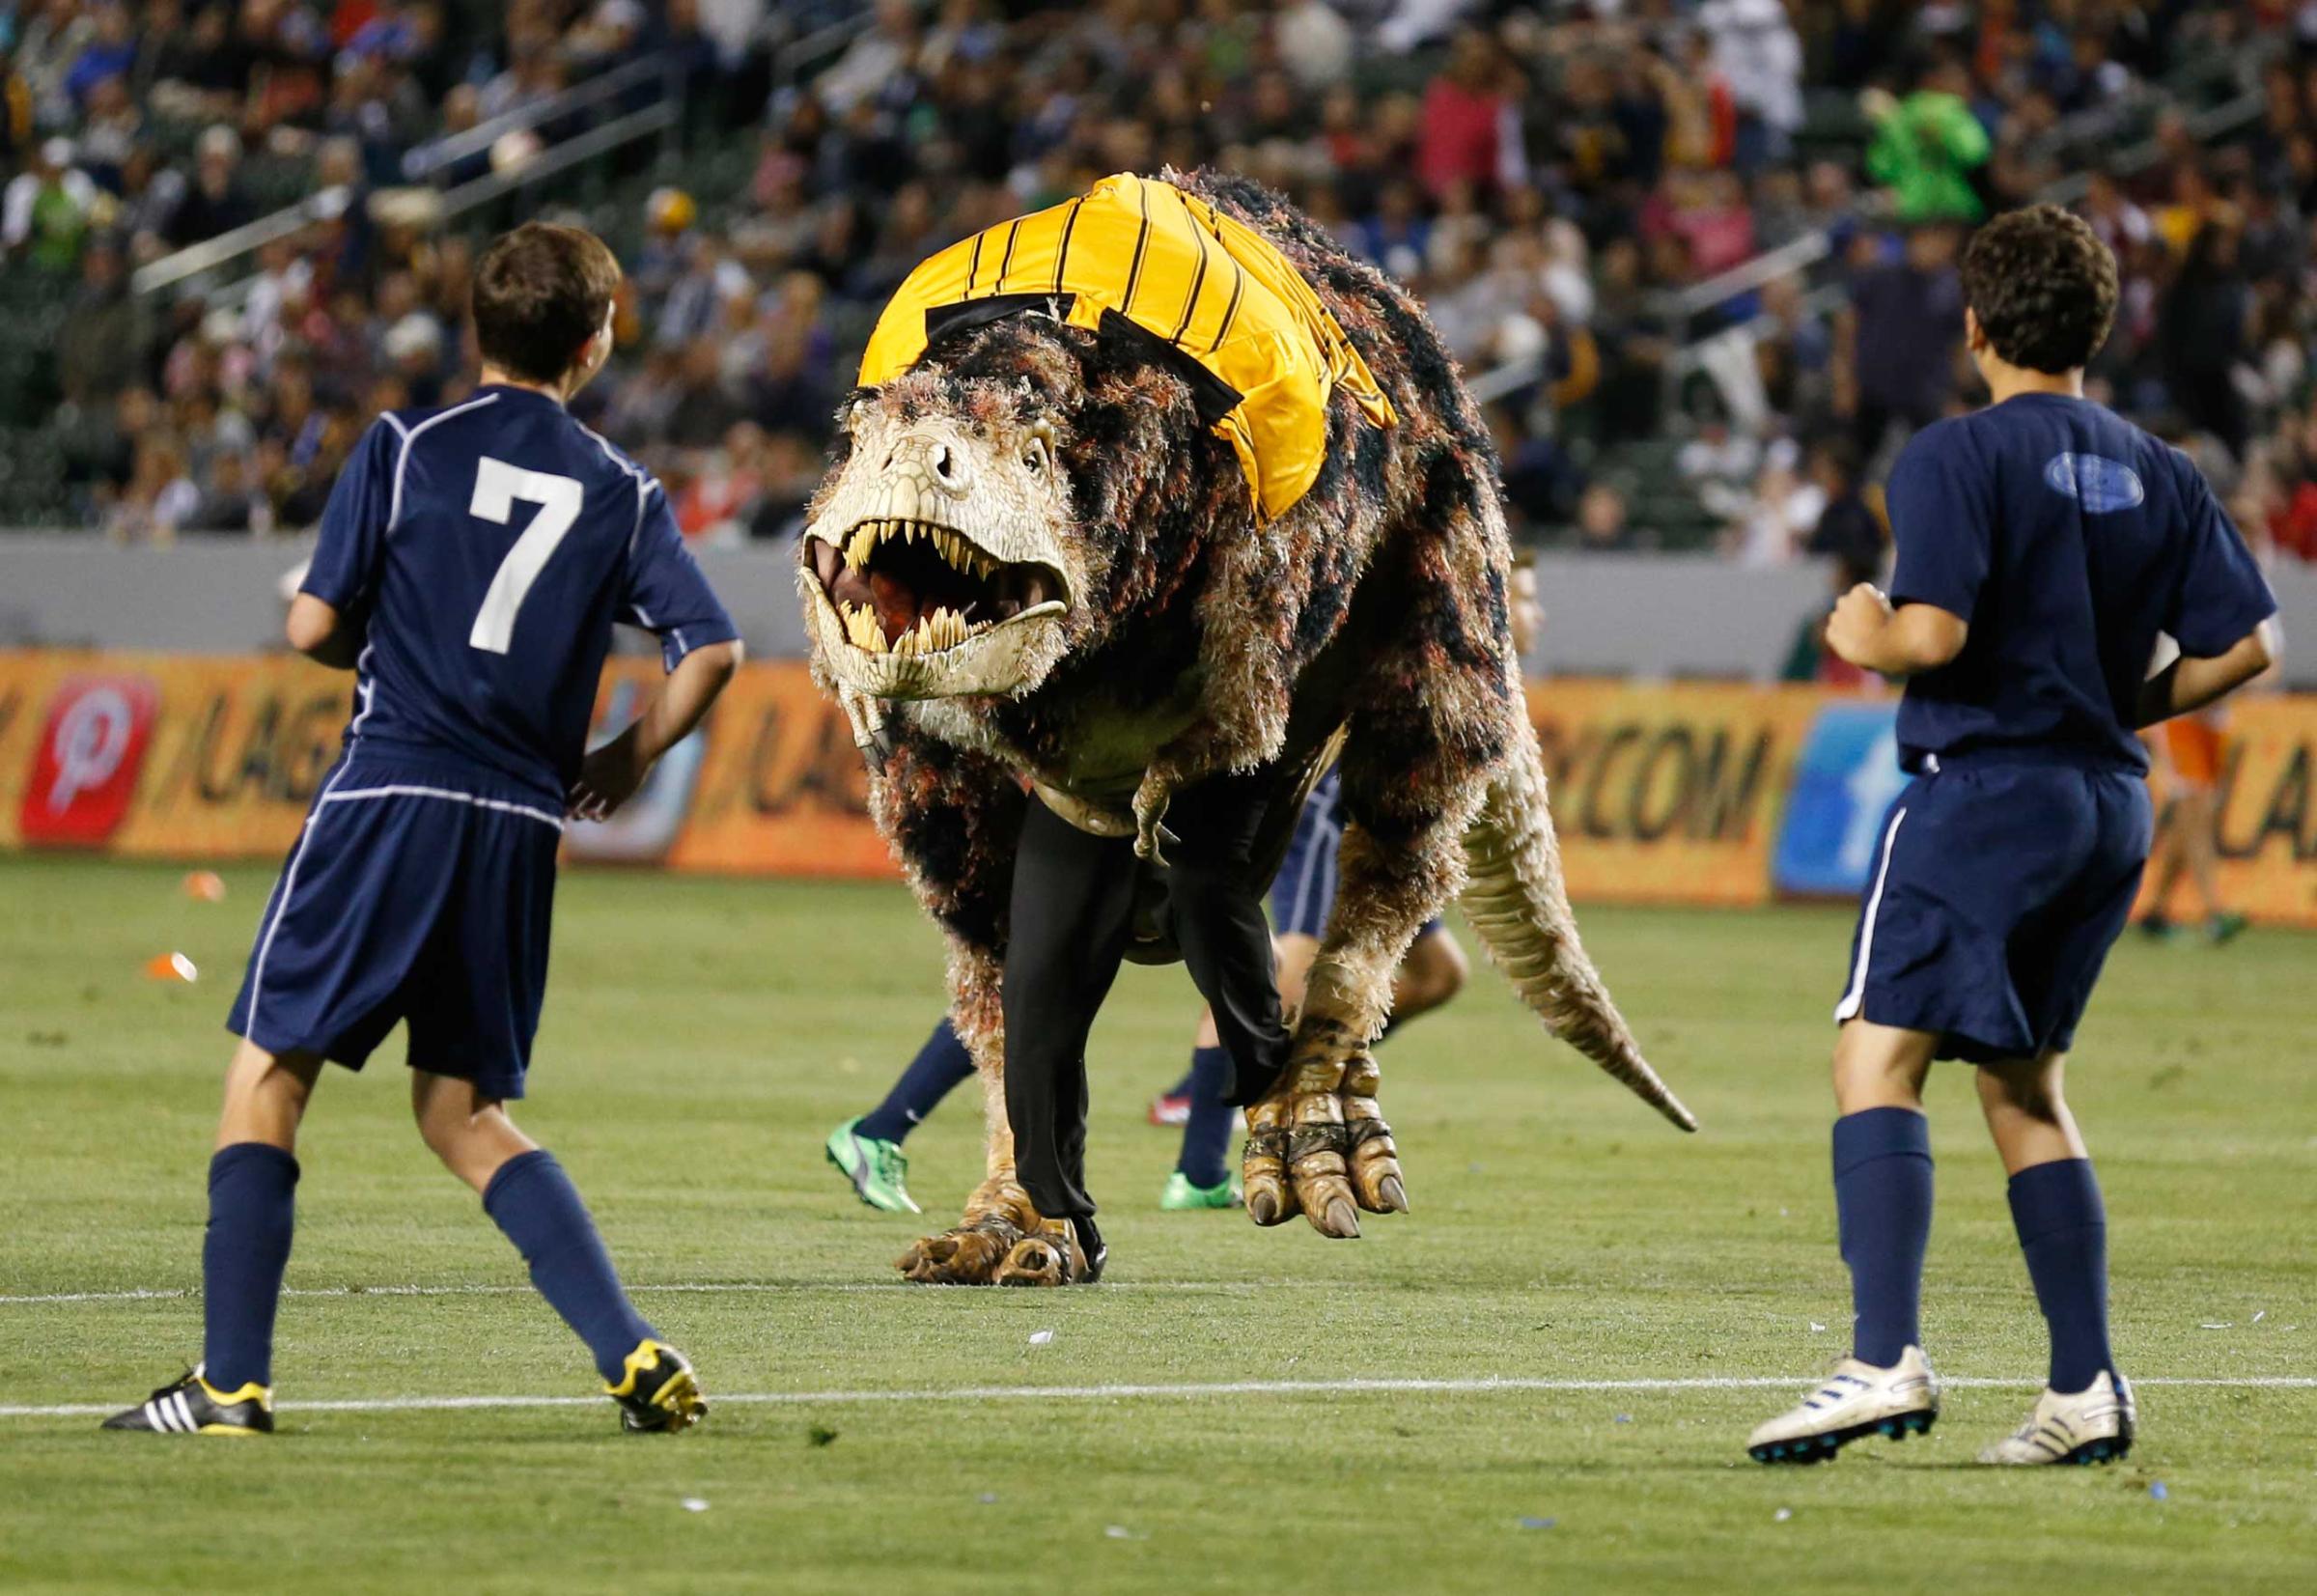 A person in a Tyrannosaurus Rex dinosaur costume runs on the field as young boys play an exhibition soccer match during halftime of the MLS soccer game between the Los Angeles Galaxy and Seattle Sounders FC in Carson